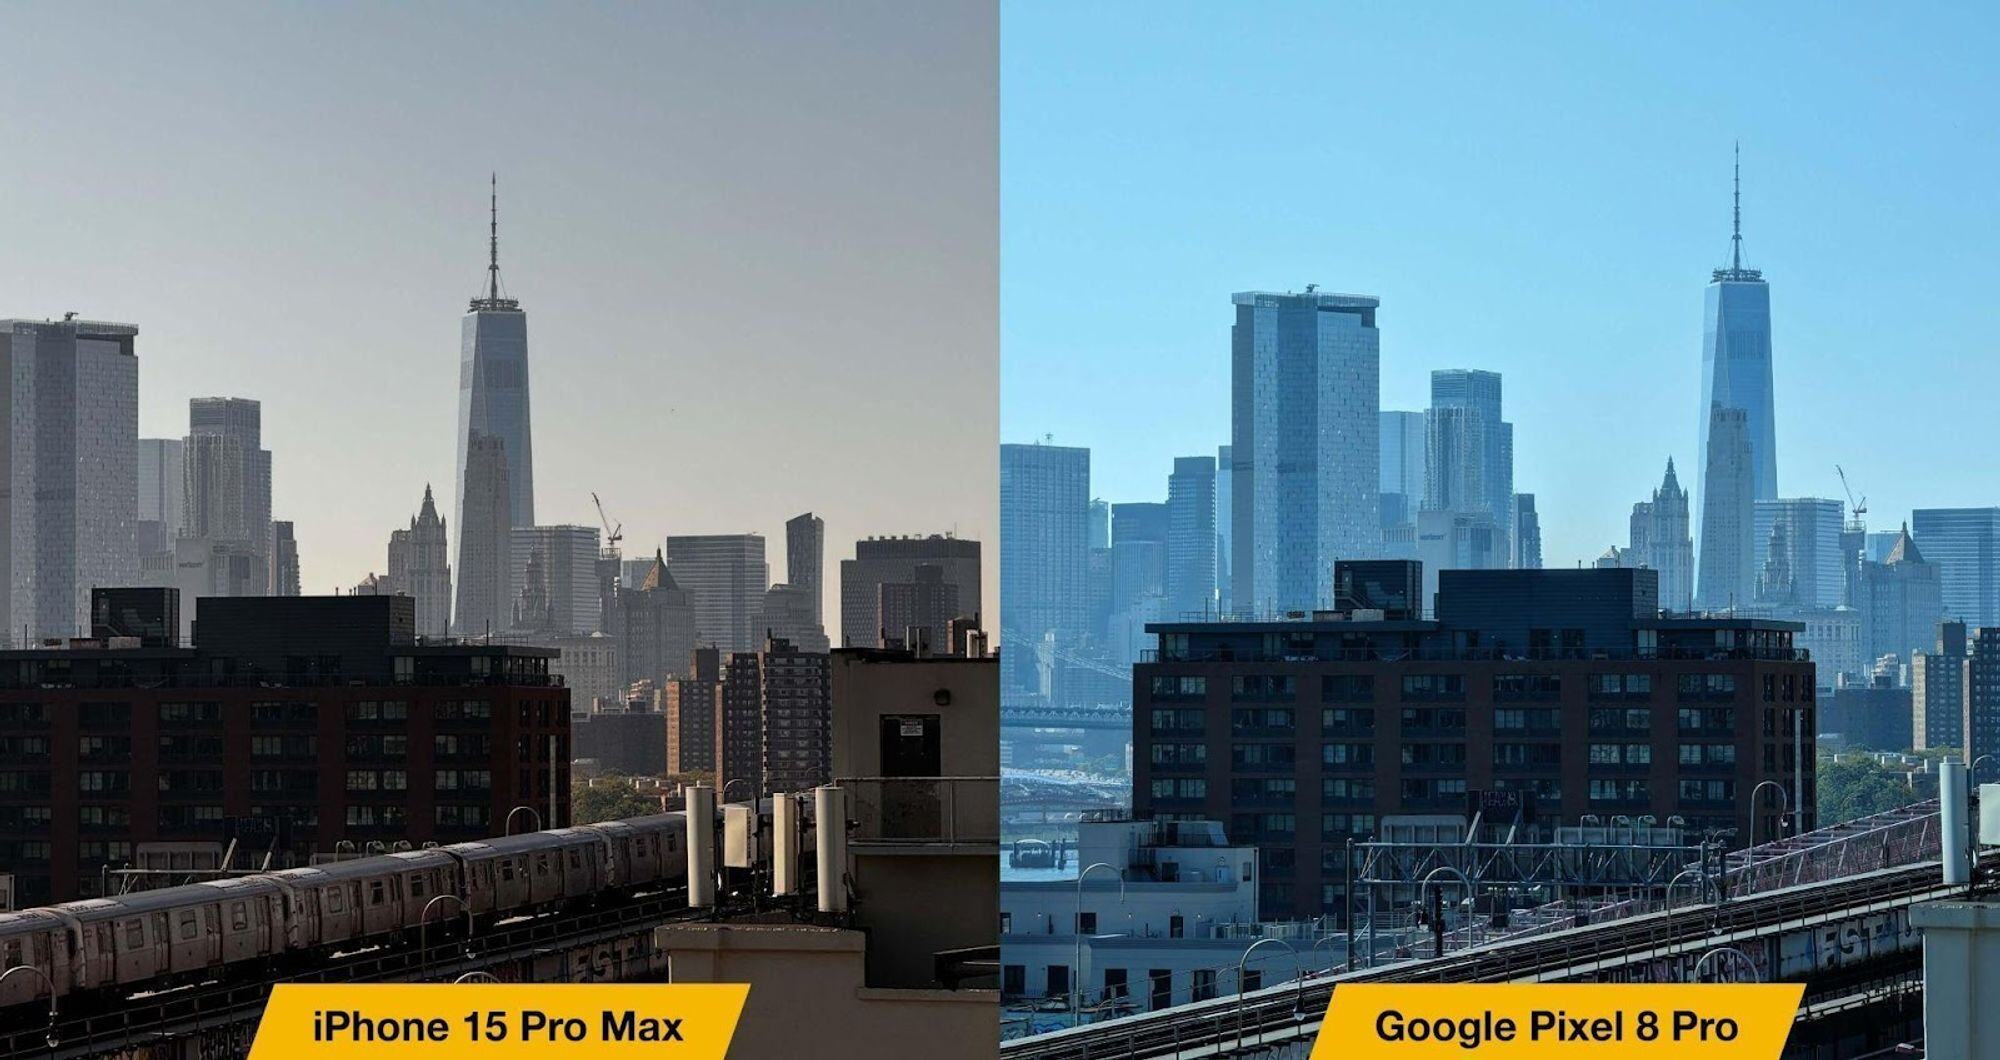 Difference in image quality between Google Pixel 8 and the iPhone 15